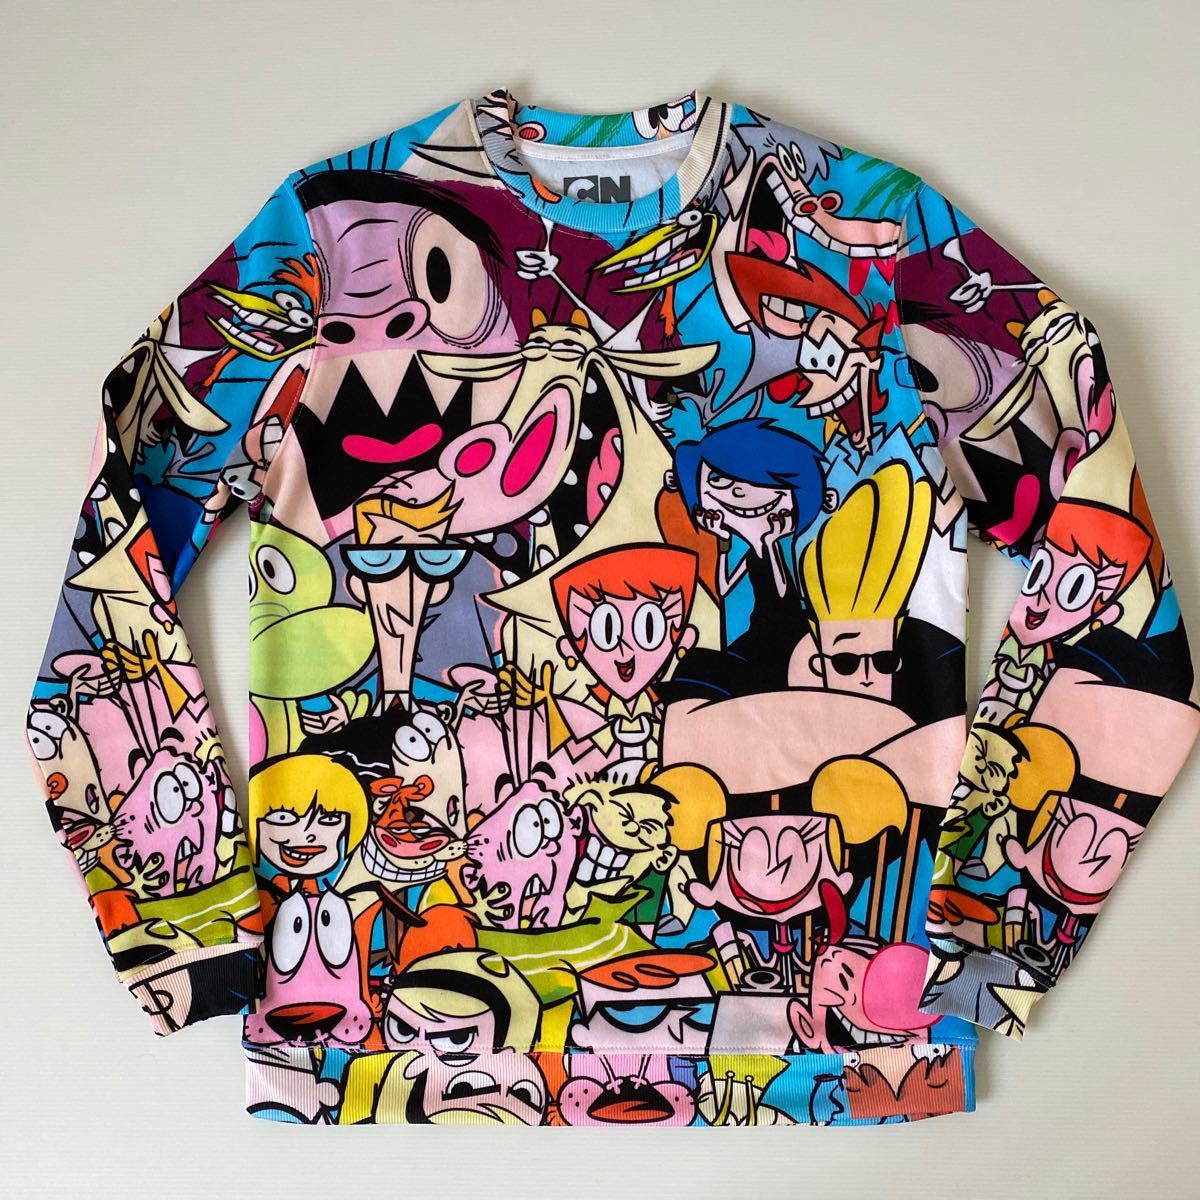  car toe nCARTOONNETWORK men's sweat reverse side nappy XS( day person himself S~M corresponding )1 times have on total pattern American Comics four ever 21 total pattern . hand ko-te woman OK